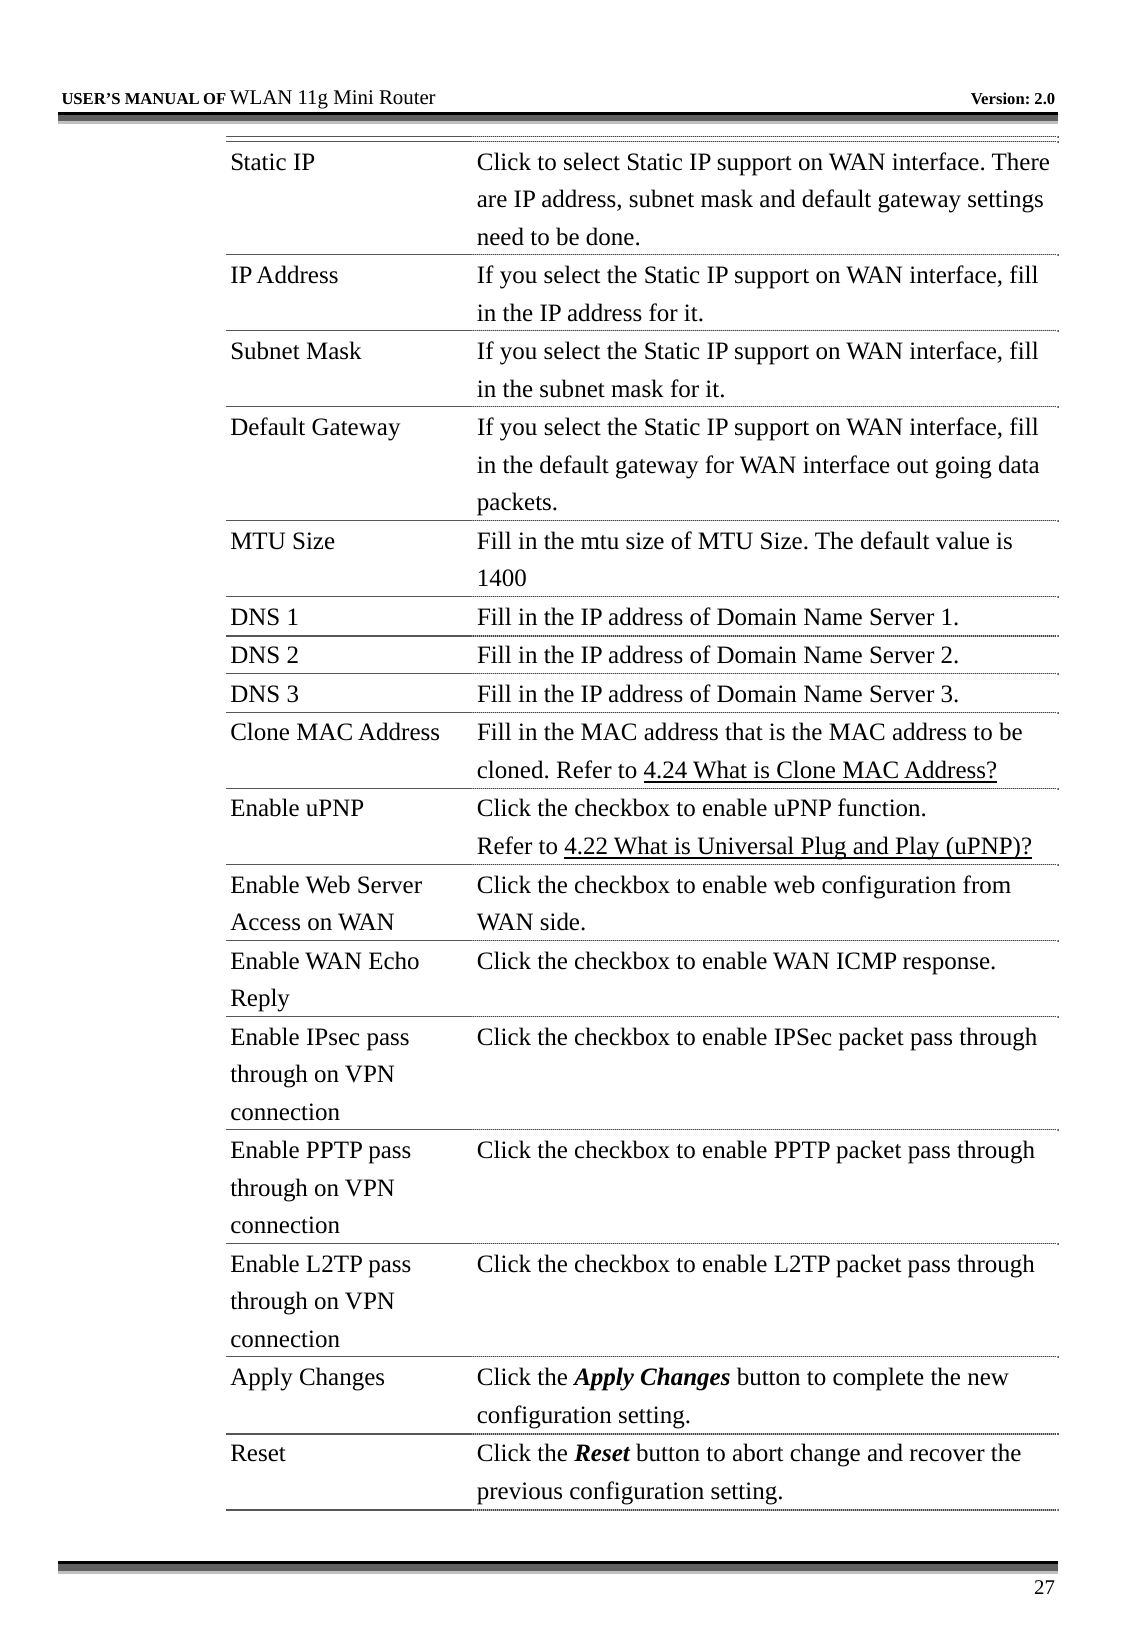   USER’S MANUAL OF WLAN 11g Mini Router   Version: 2.0     27   Static IP  Click to select Static IP support on WAN interface. There are IP address, subnet mask and default gateway settings need to be done. IP Address  If you select the Static IP support on WAN interface, fill in the IP address for it. Subnet Mask  If you select the Static IP support on WAN interface, fill in the subnet mask for it. Default Gateway  If you select the Static IP support on WAN interface, fill in the default gateway for WAN interface out going data packets. MTU Size  Fill in the mtu size of MTU Size. The default value is 1400 DNS 1  Fill in the IP address of Domain Name Server 1. DNS 2  Fill in the IP address of Domain Name Server 2. DNS 3  Fill in the IP address of Domain Name Server 3. Clone MAC Address  Fill in the MAC address that is the MAC address to be cloned. Refer to 4.24 What is Clone MAC Address? Enable uPNP  Click the checkbox to enable uPNP function. Refer to 4.22 What is Universal Plug and Play (uPNP)? Enable Web Server Access on WAN Click the checkbox to enable web configuration from WAN side. Enable WAN Echo Reply Click the checkbox to enable WAN ICMP response. Enable IPsec pass through on VPN connection Click the checkbox to enable IPSec packet pass through Enable PPTP pass through on VPN connection Click the checkbox to enable PPTP packet pass through Enable L2TP pass through on VPN connection Click the checkbox to enable L2TP packet pass through Apply Changes  Click the Apply Changes button to complete the new configuration setting. Reset Click the Reset button to abort change and recover the previous configuration setting. 